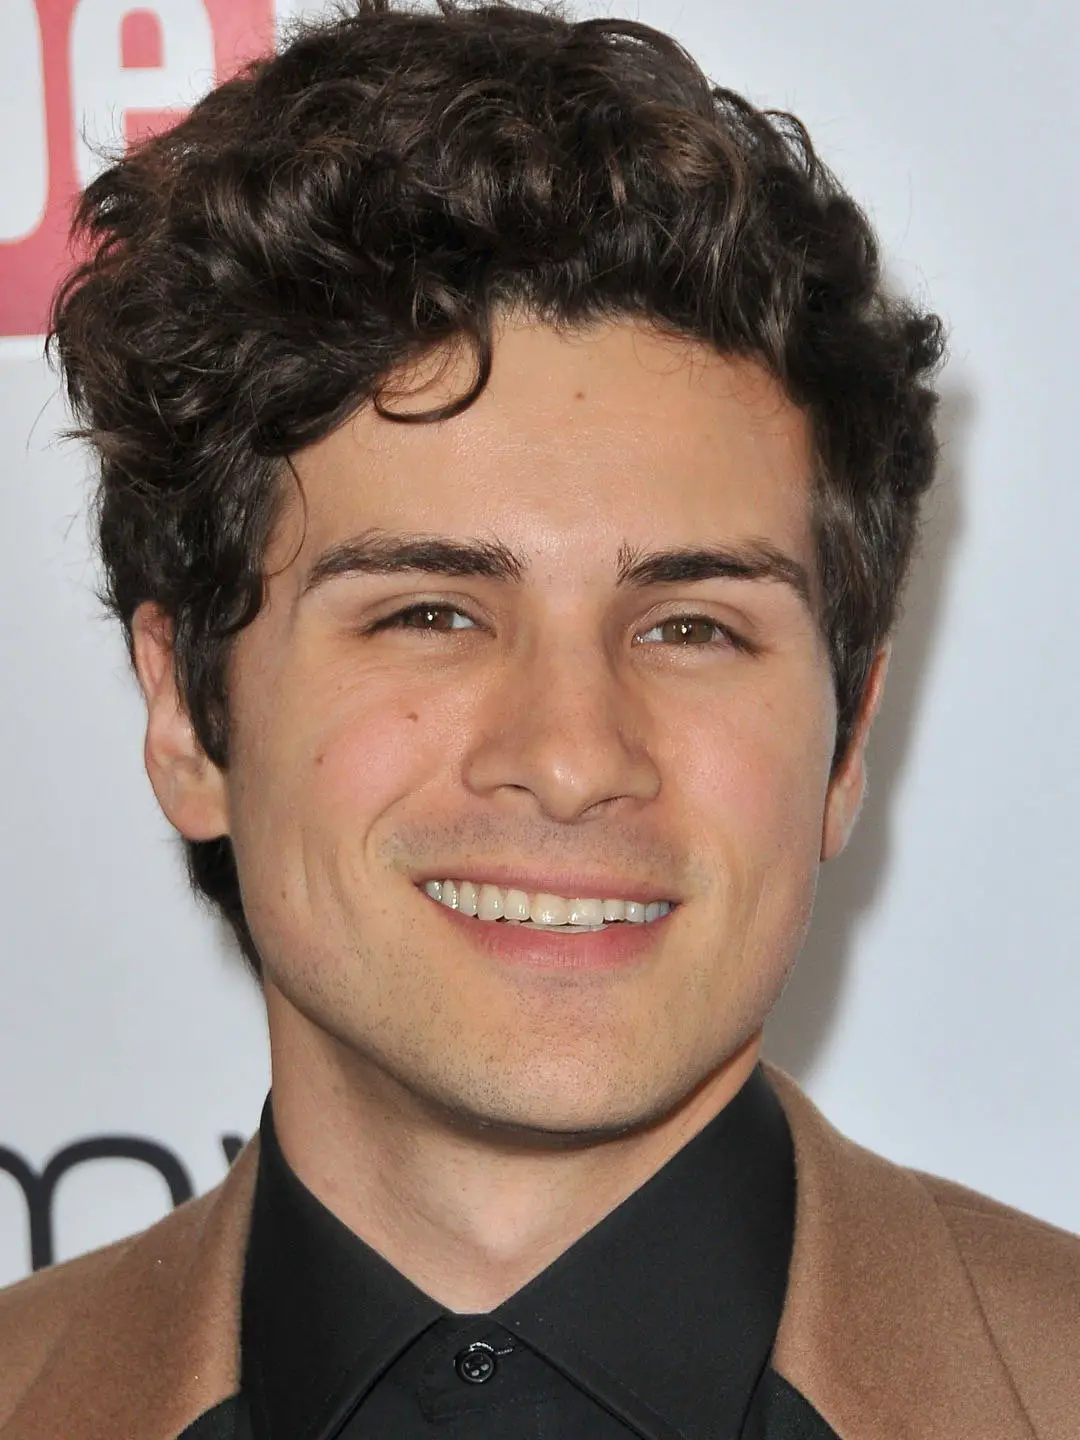 What is Anthony Padillas Net Worth After He Left Smosh?